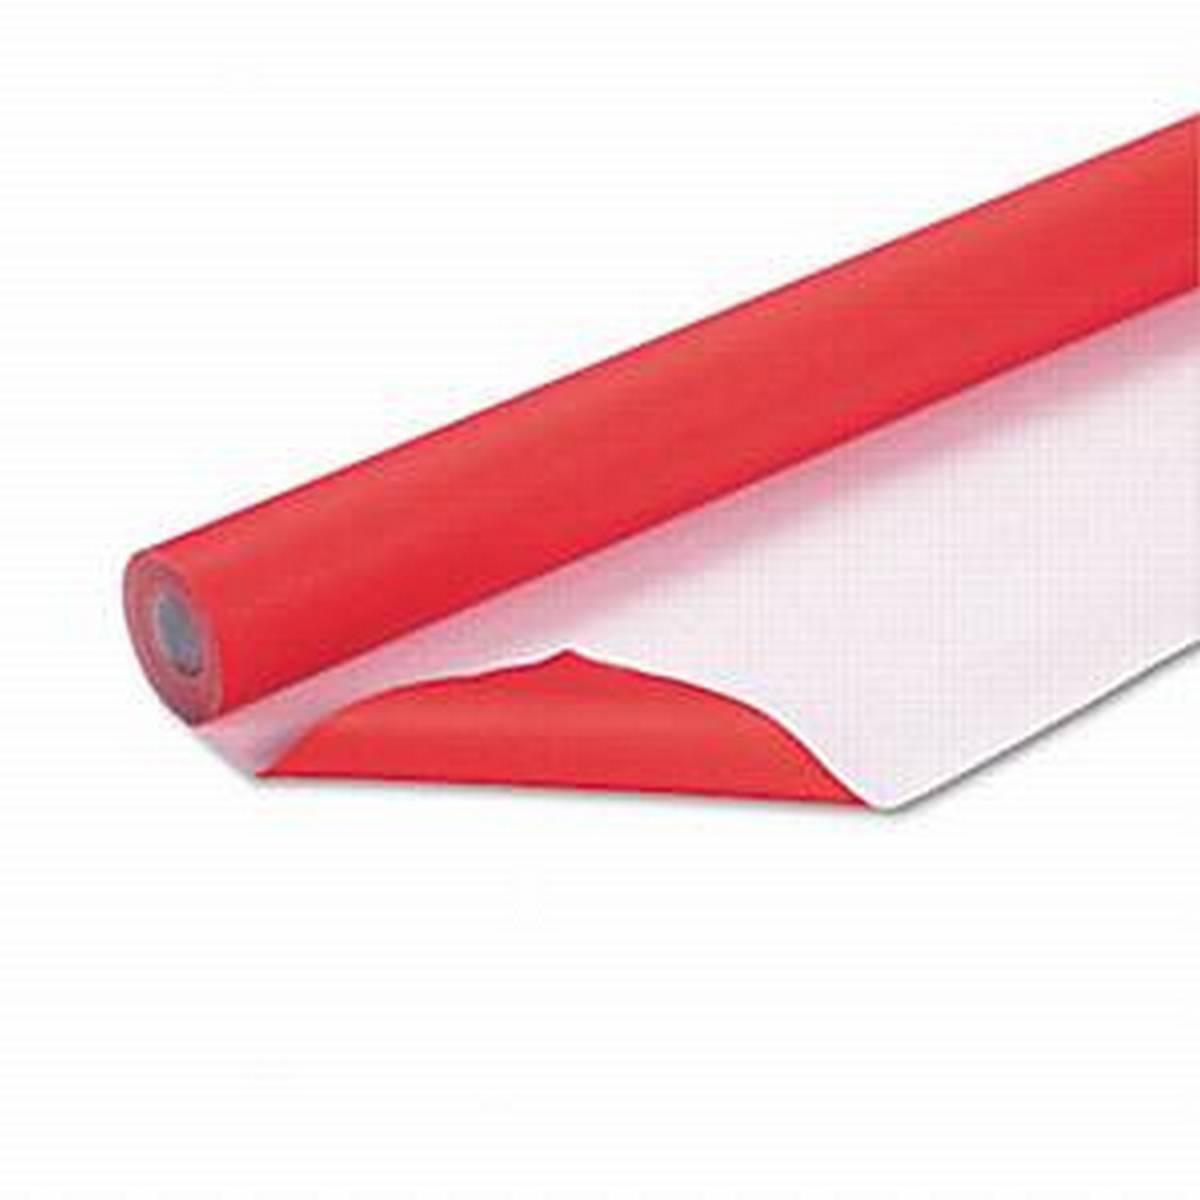 Fadeless Display Rolls 1.2m x 3.7m Flame Red